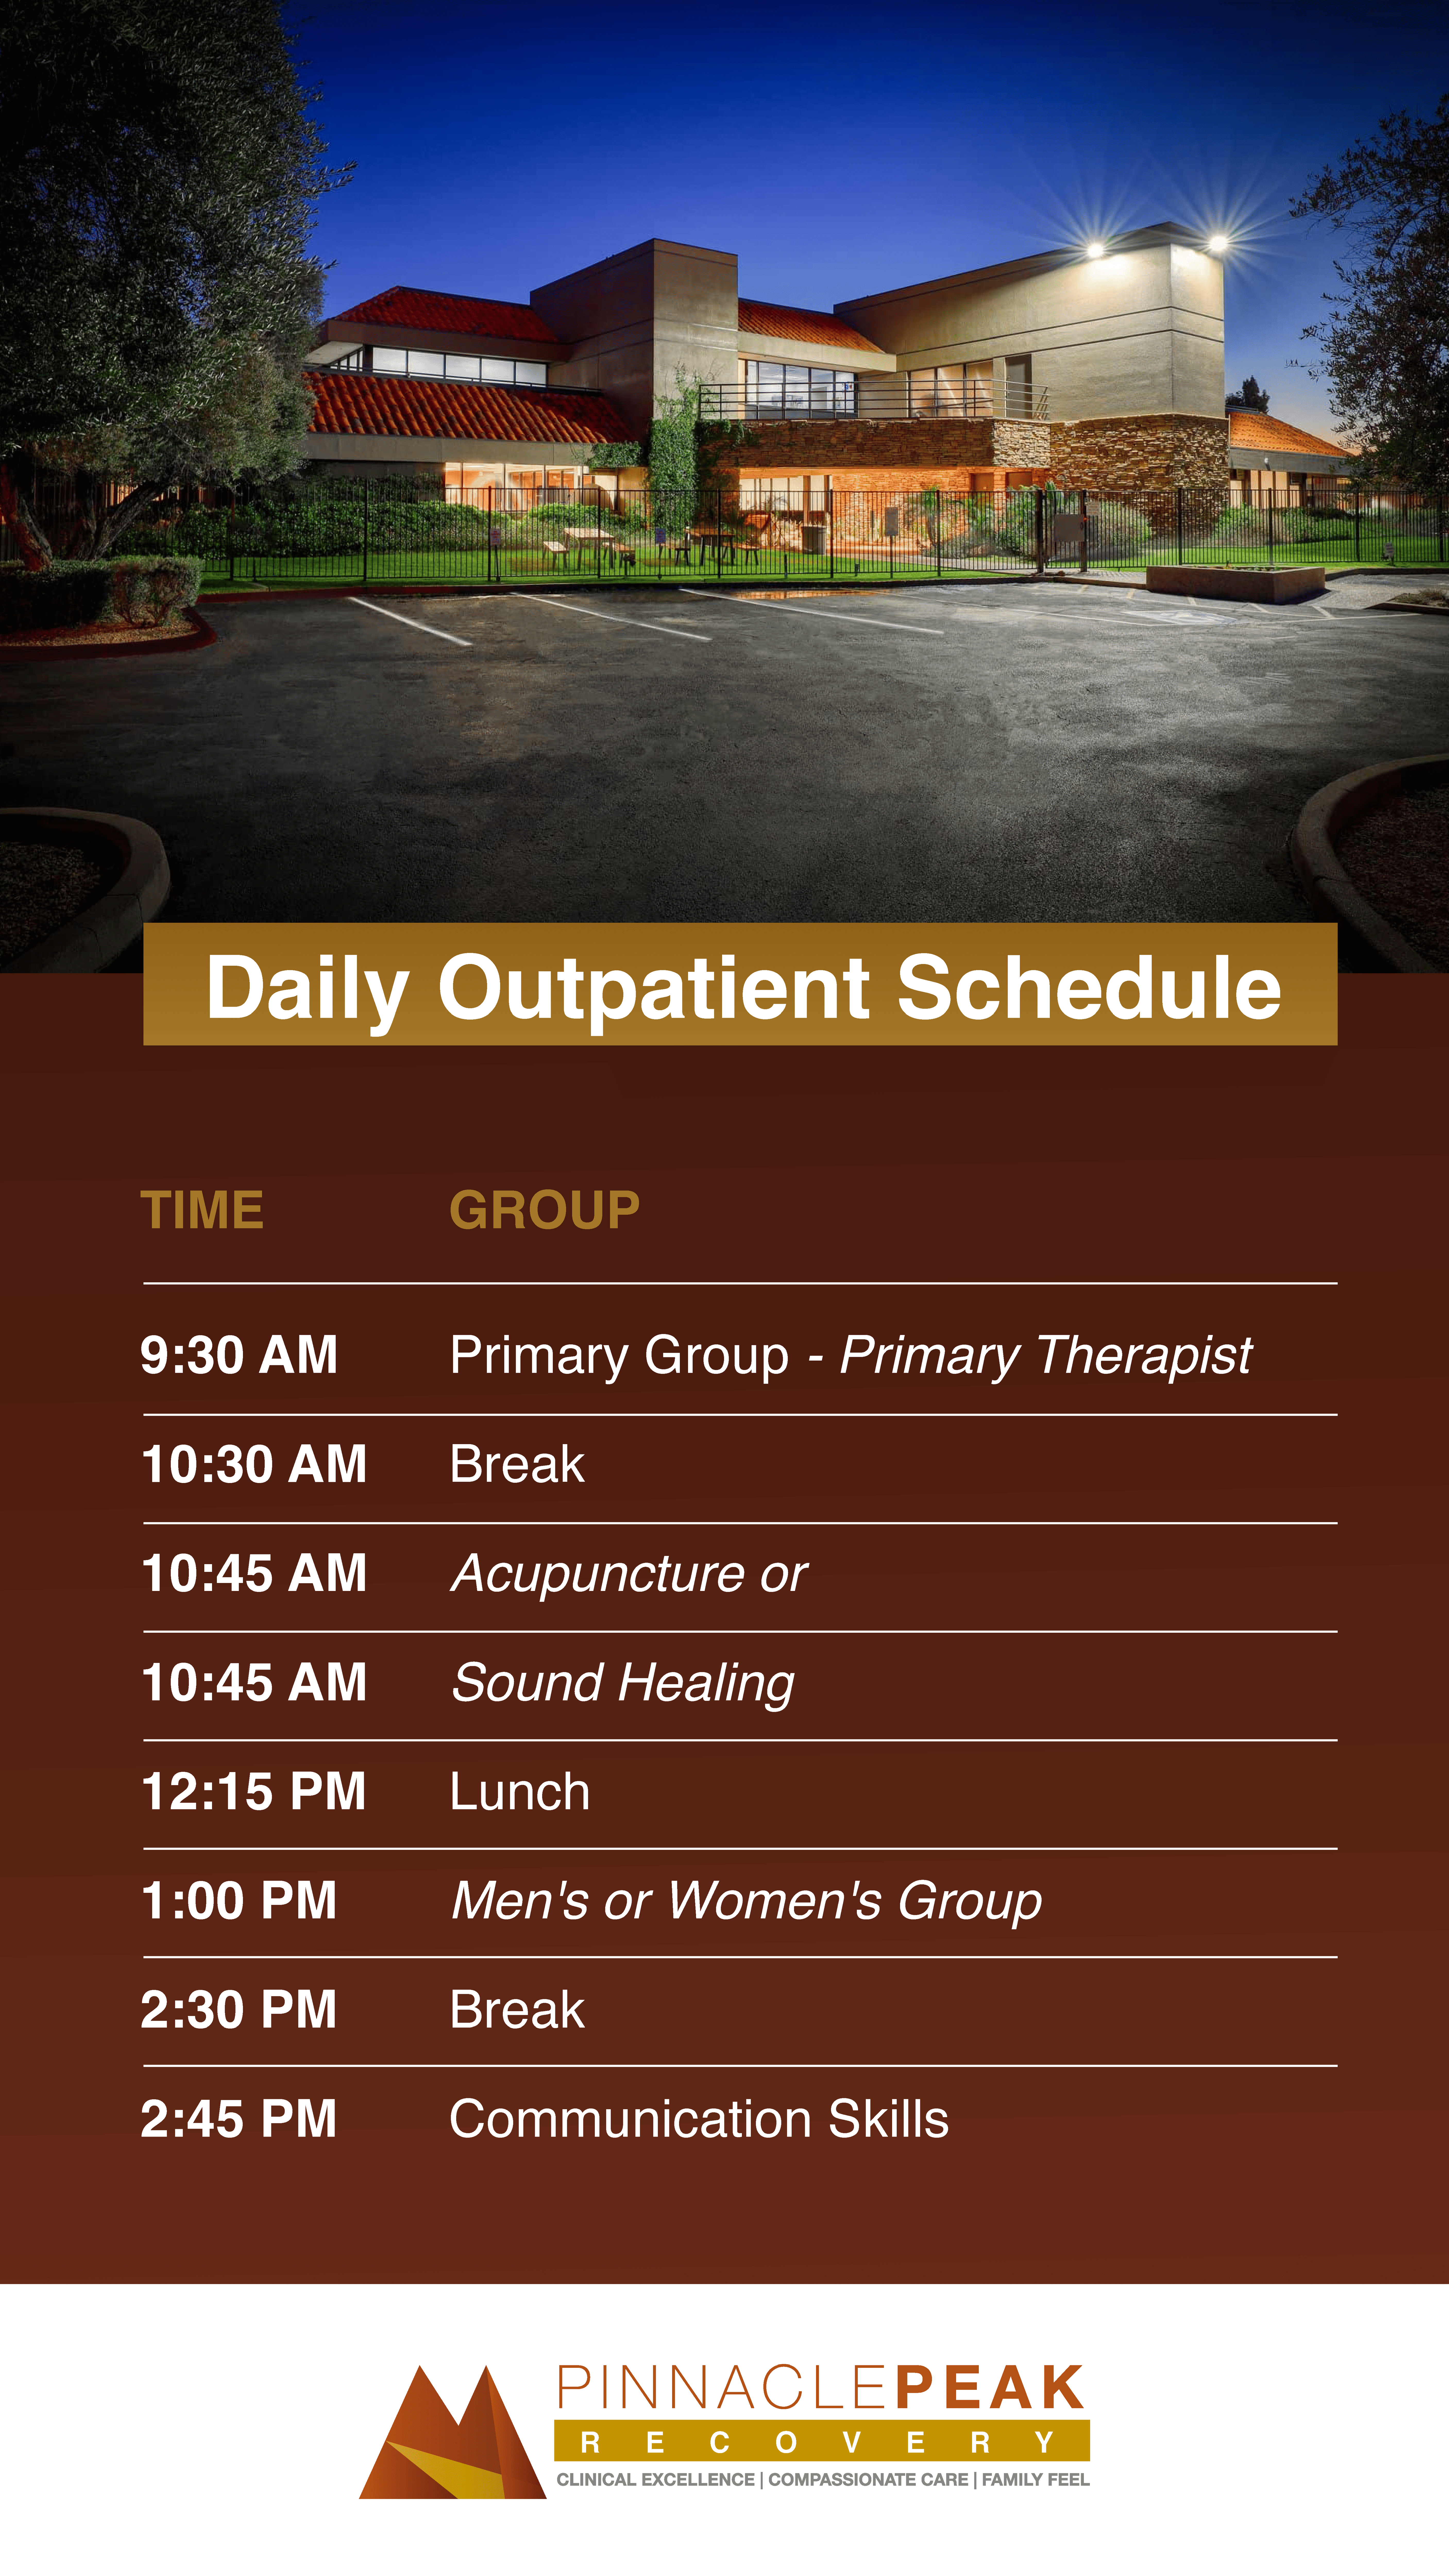 Daily Outpatient Schedule